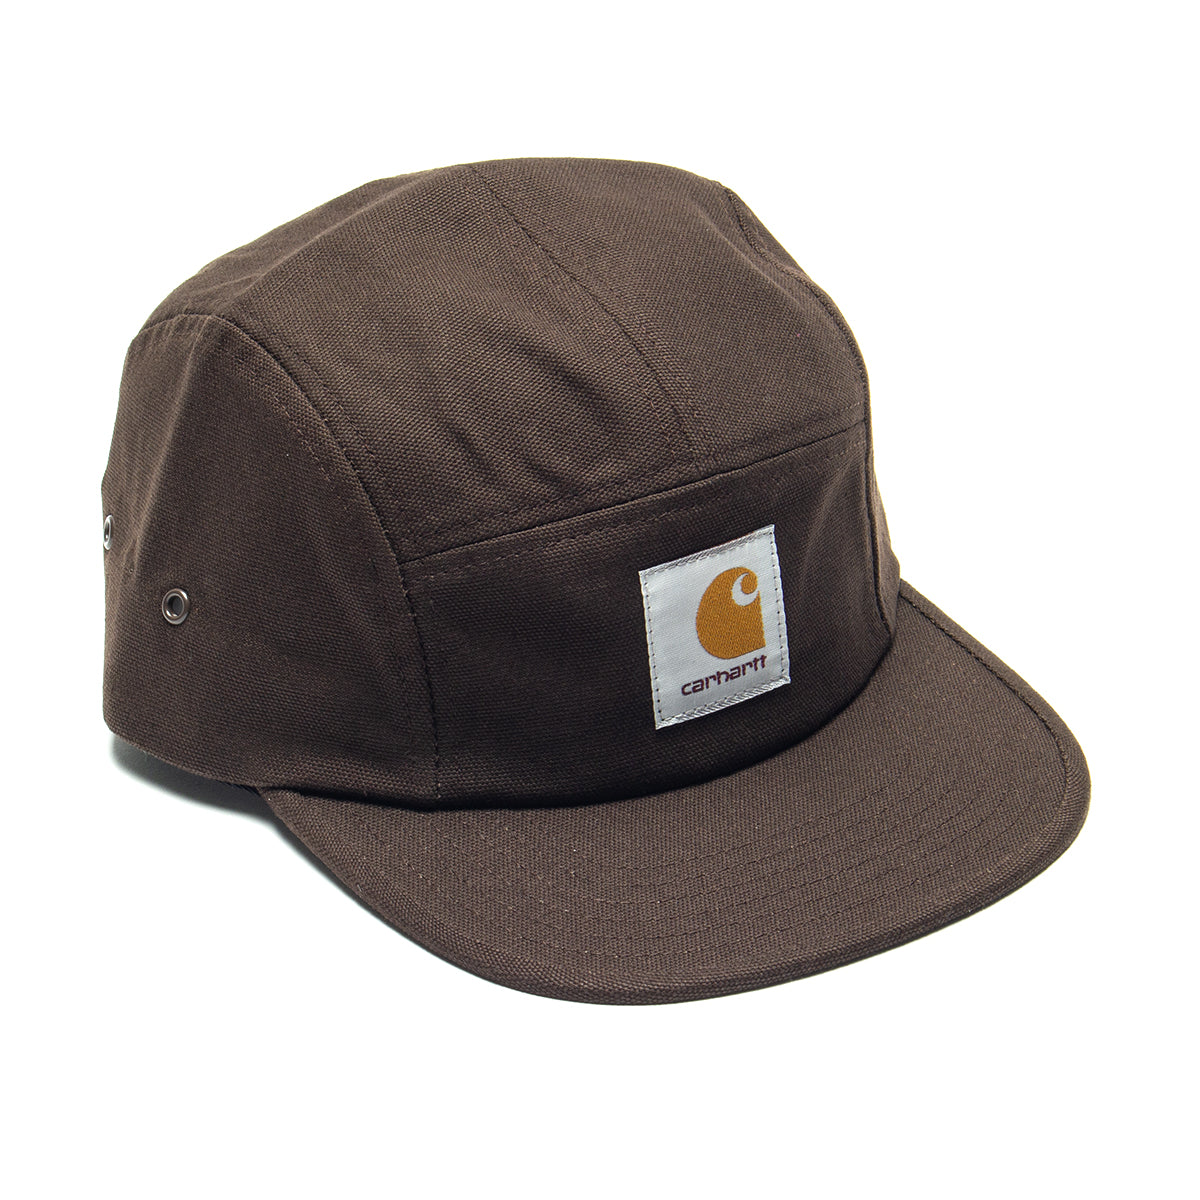 Carhartt WIP | Backley Cap  Style # I016607-47 Color : Tobacco